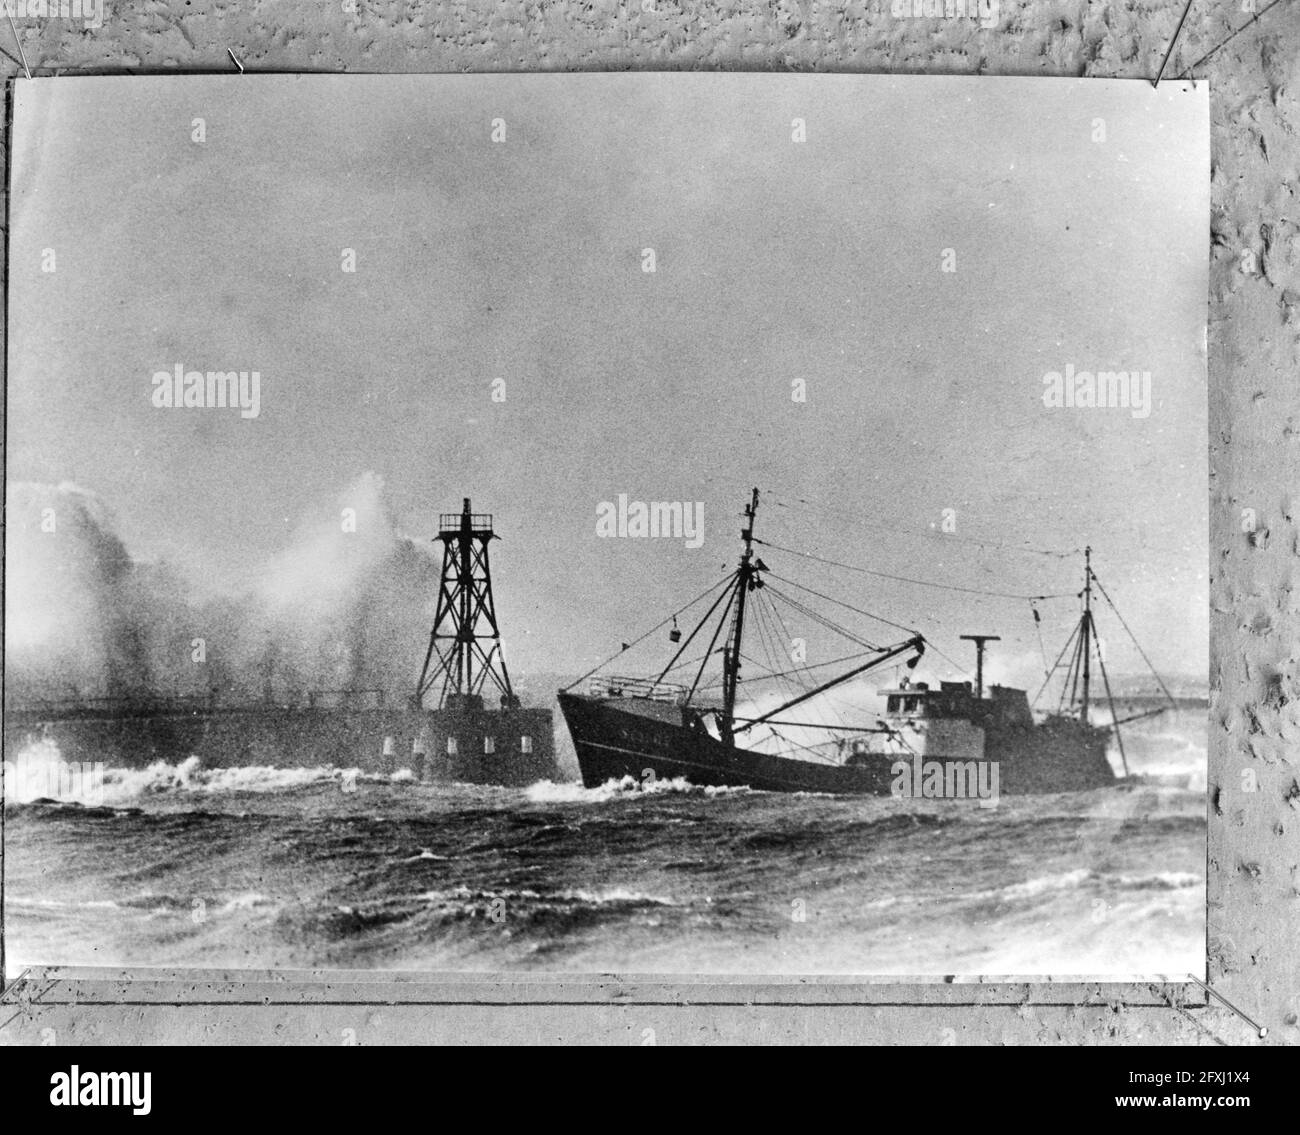 Wind force 10, fishing boat enters harbor of Scheveningen, February 23,  1967, Fishing boats, harbors, The Netherlands, 20th century press agency  photo, news to remember, documentary, historic photography 1945-1990,  visual stories, human